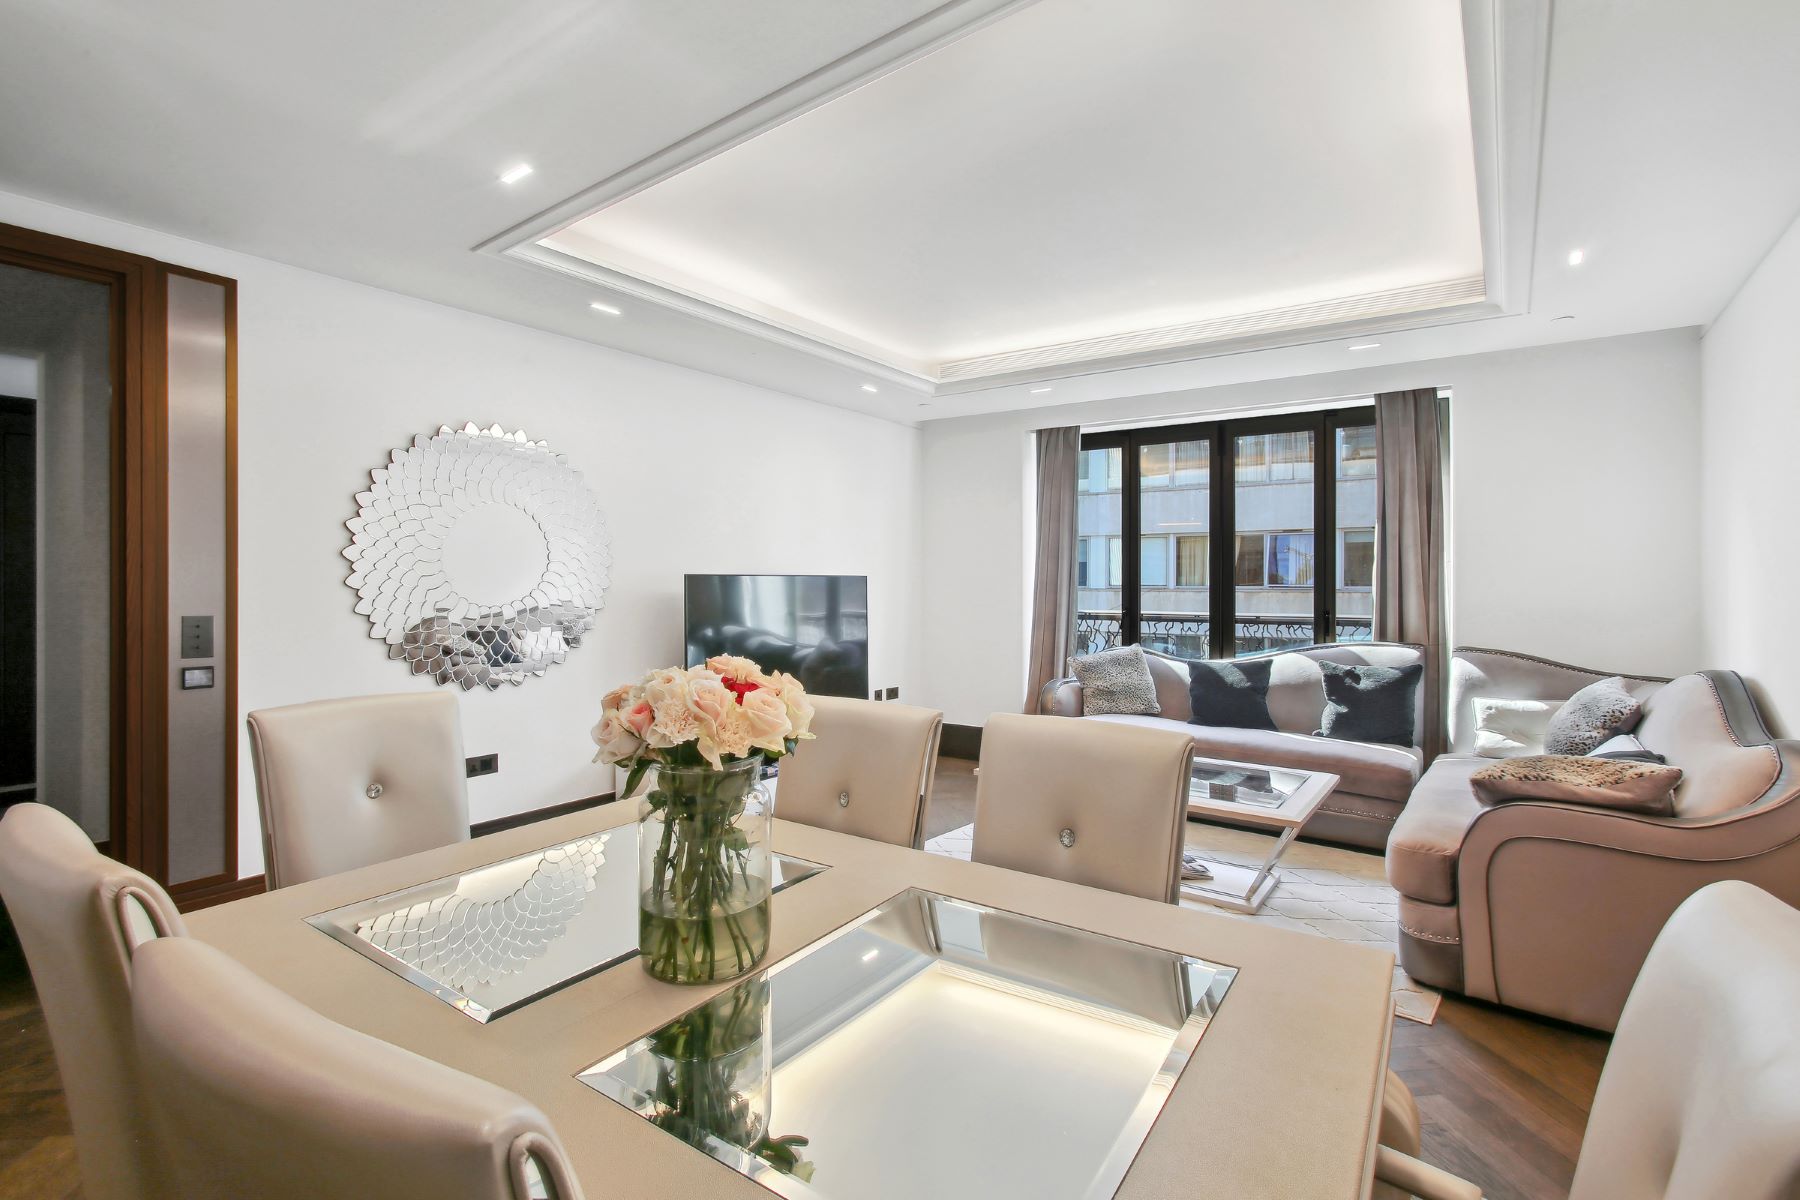 Stunning one bedroom flat in Clarges, Mayfair